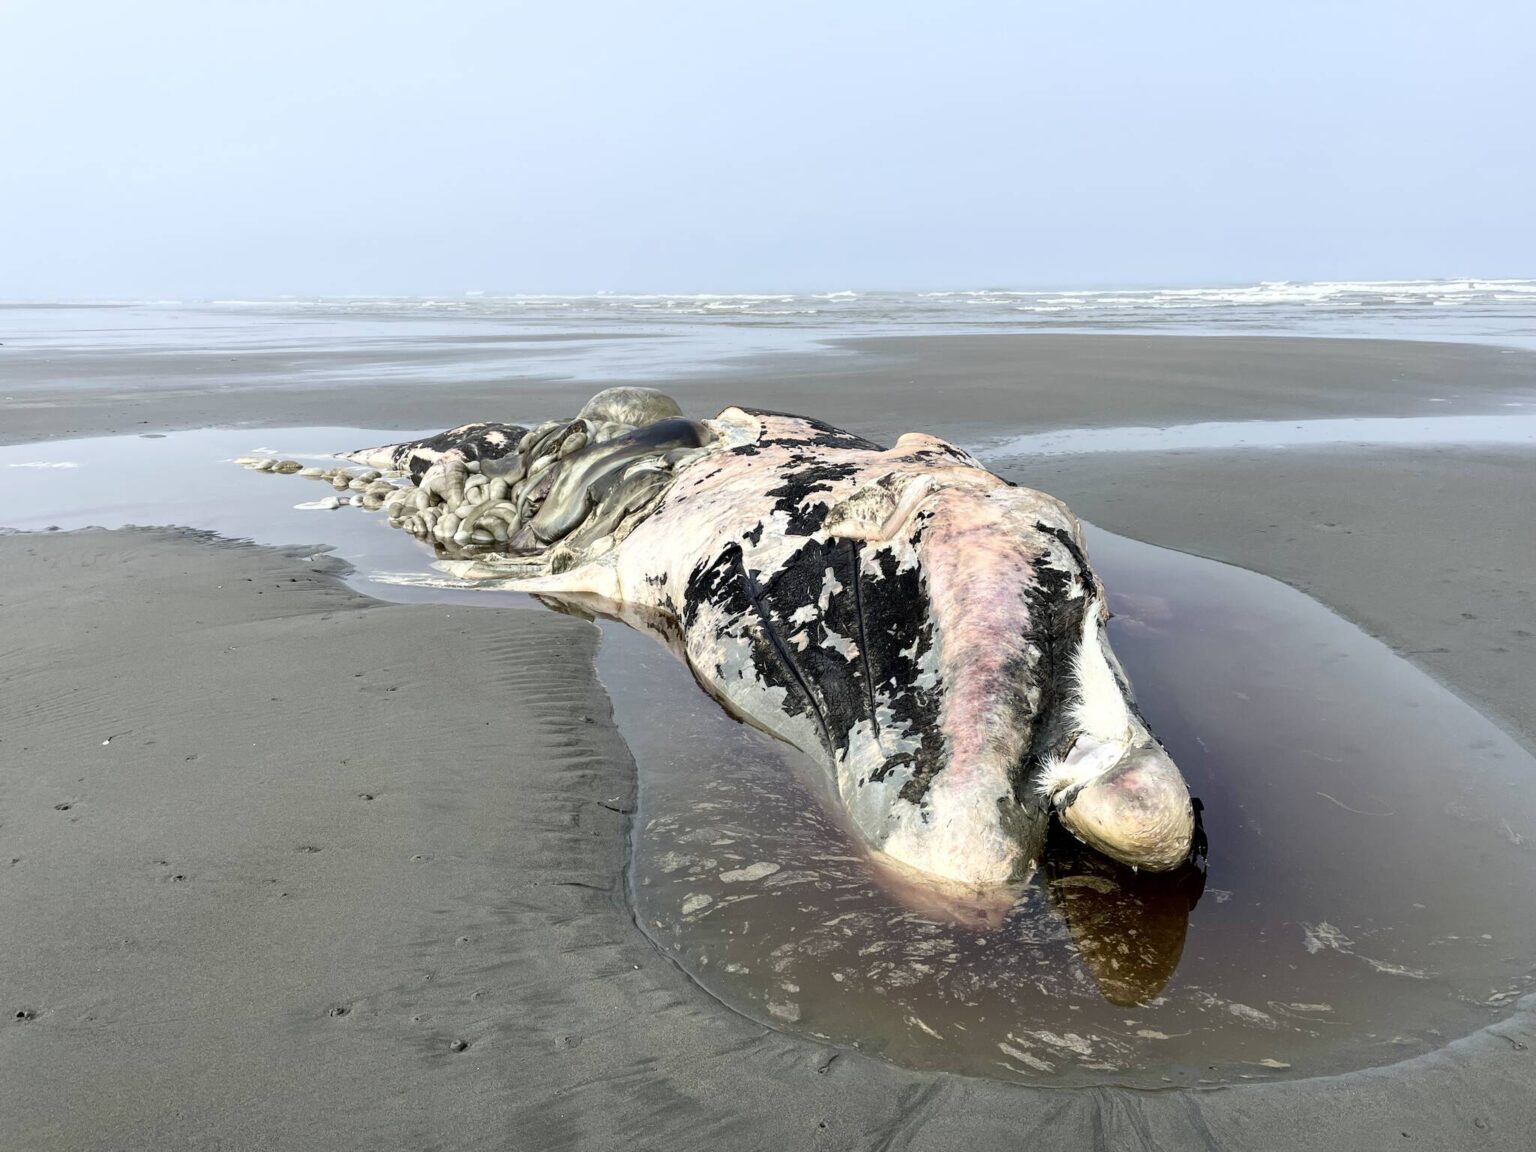 An adult gray whale washed ashore north of Ocean Shores late last week.